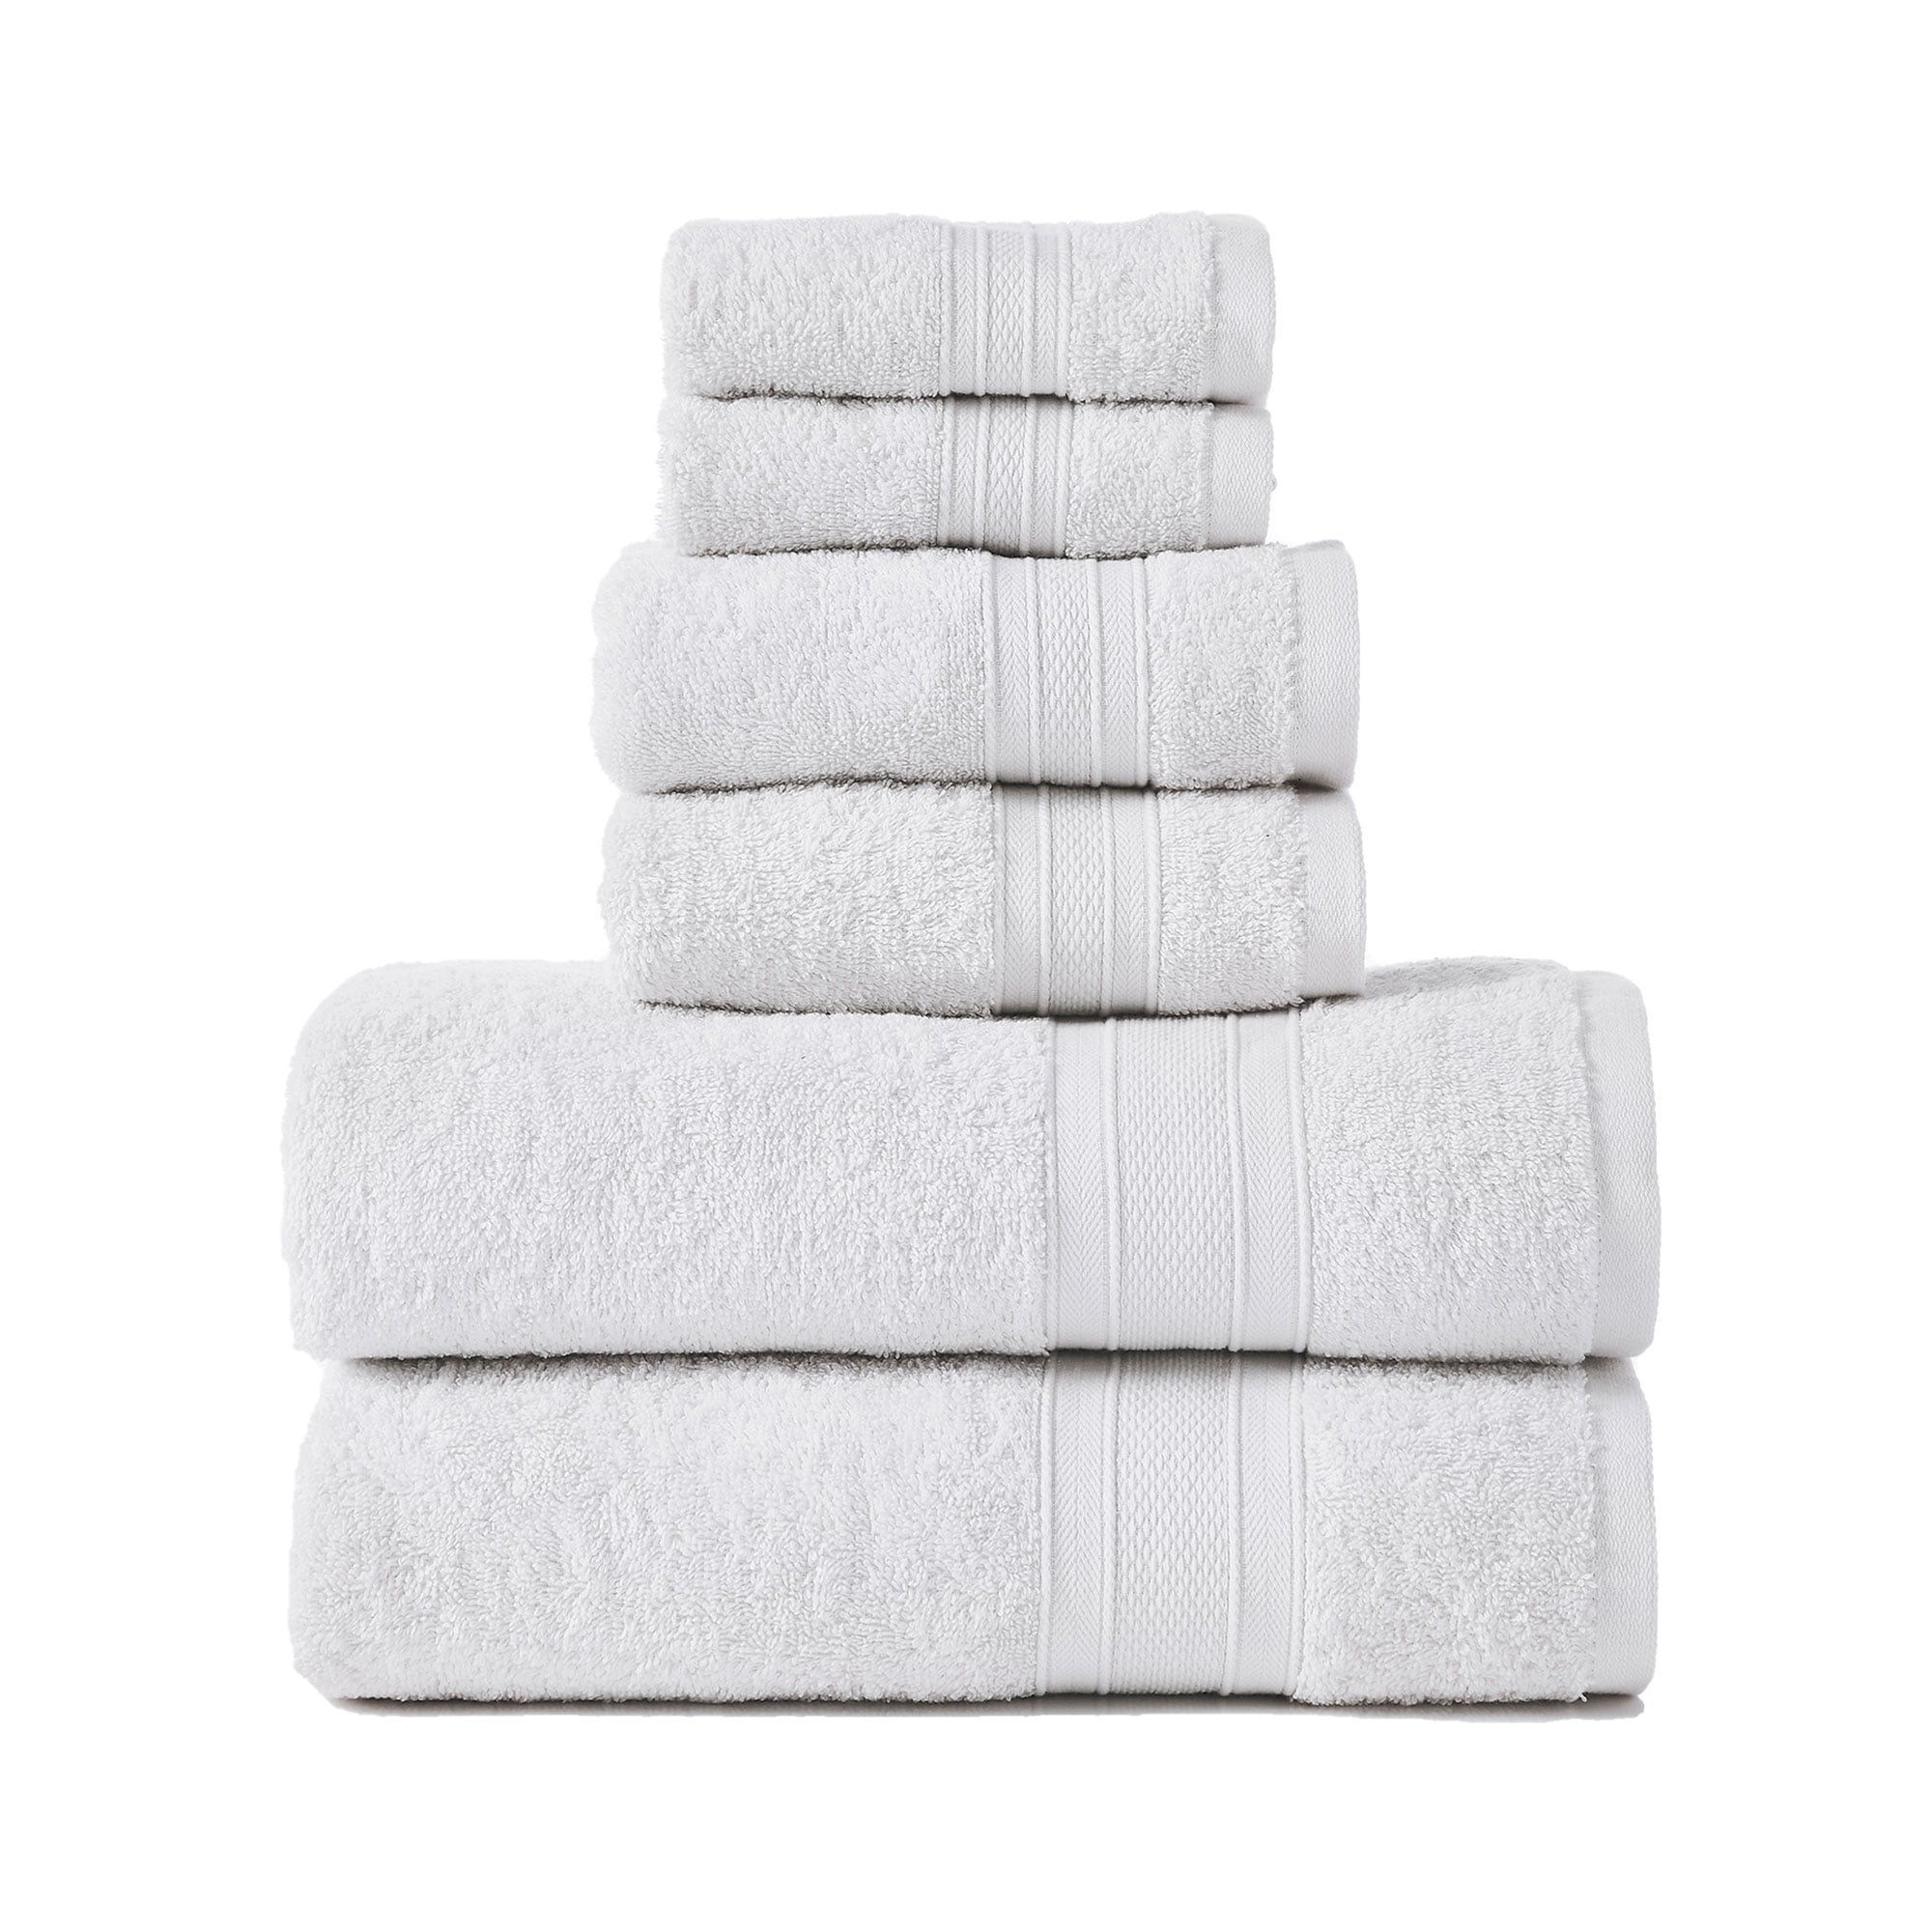 100% Cotton Hotel Quality Towel Set of 12 White Towels 500GSM 